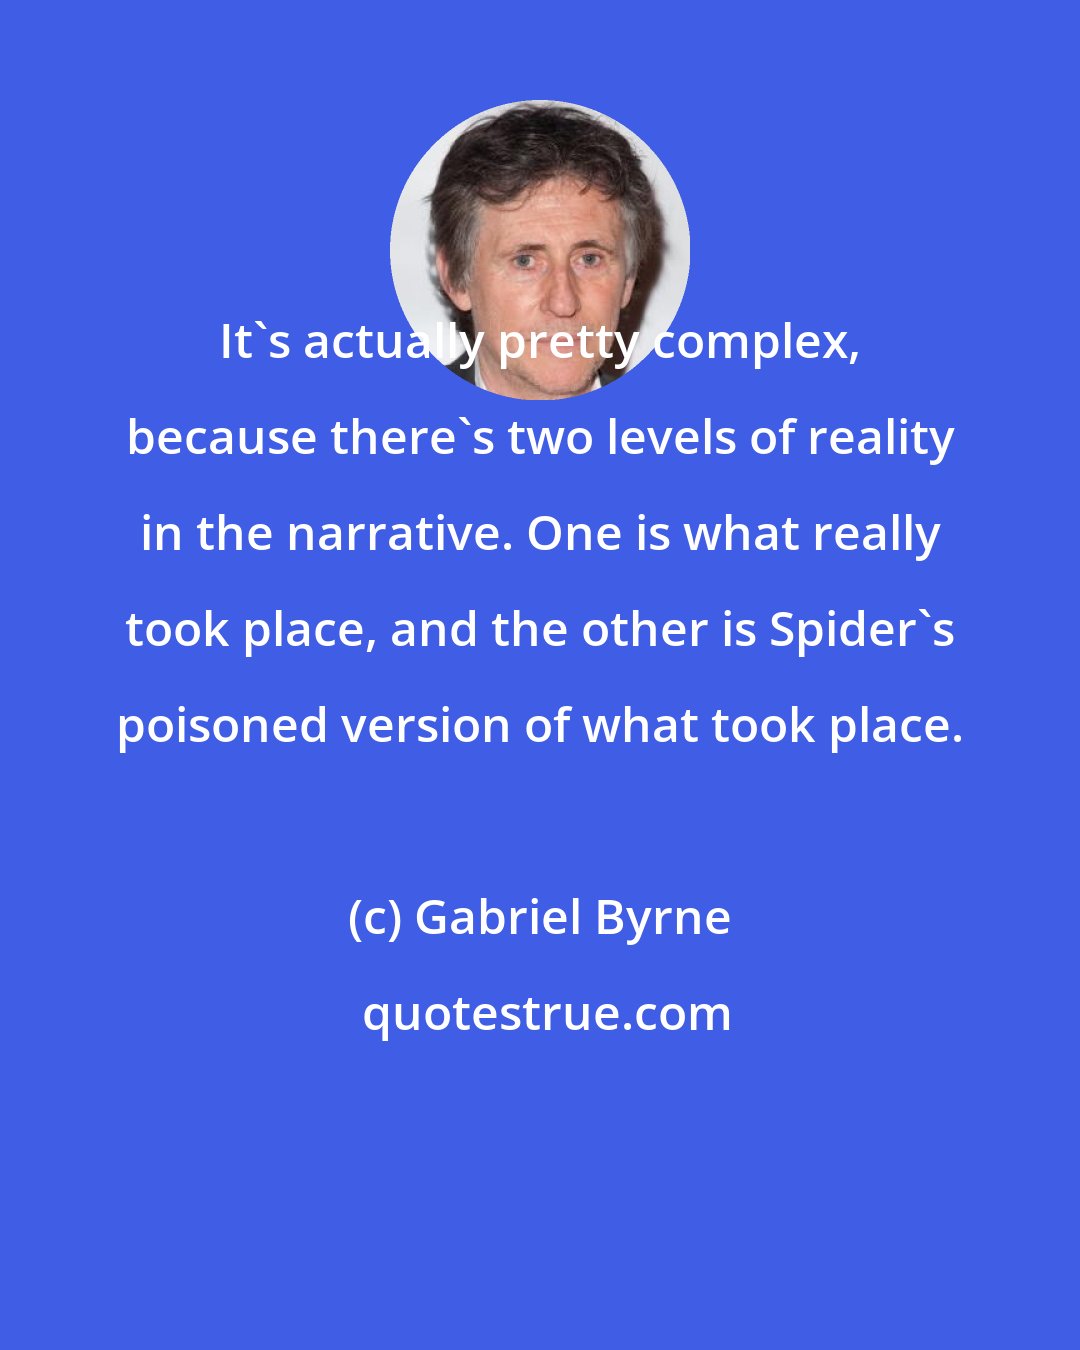 Gabriel Byrne: It's actually pretty complex, because there's two levels of reality in the narrative. One is what really took place, and the other is Spider's poisoned version of what took place.